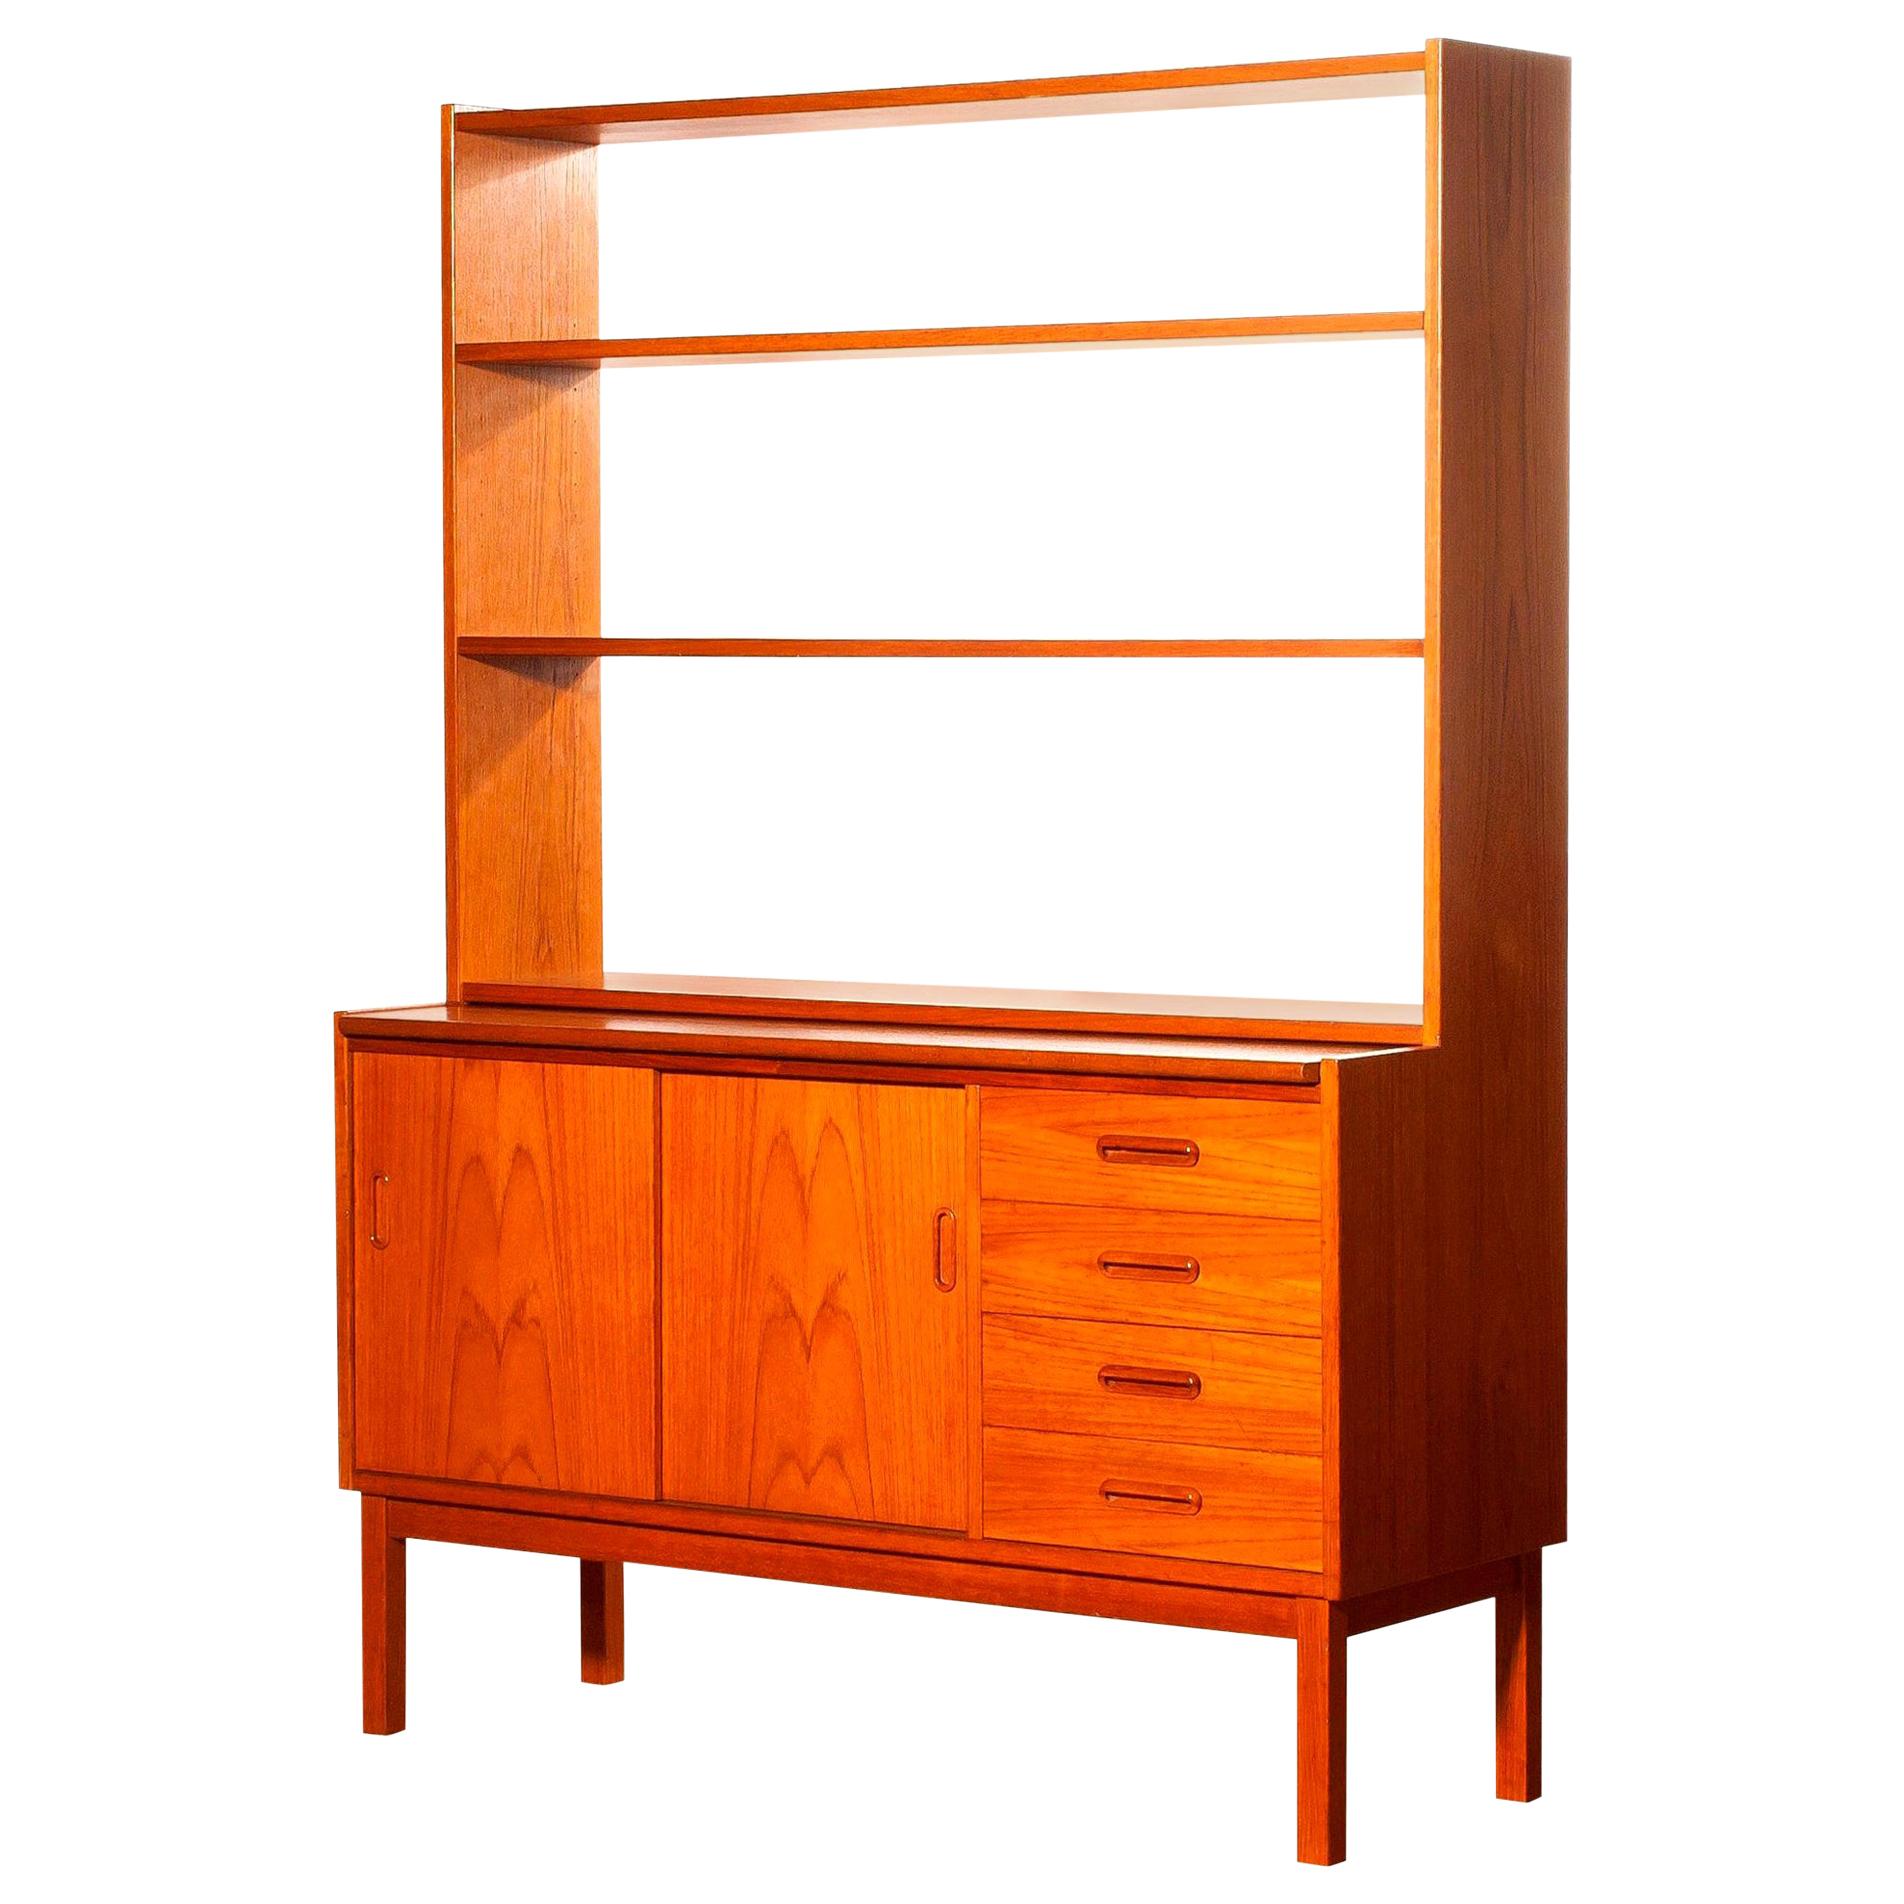 1960s, Teak Bookcase with Slidable Writing or Working Space from Sweden